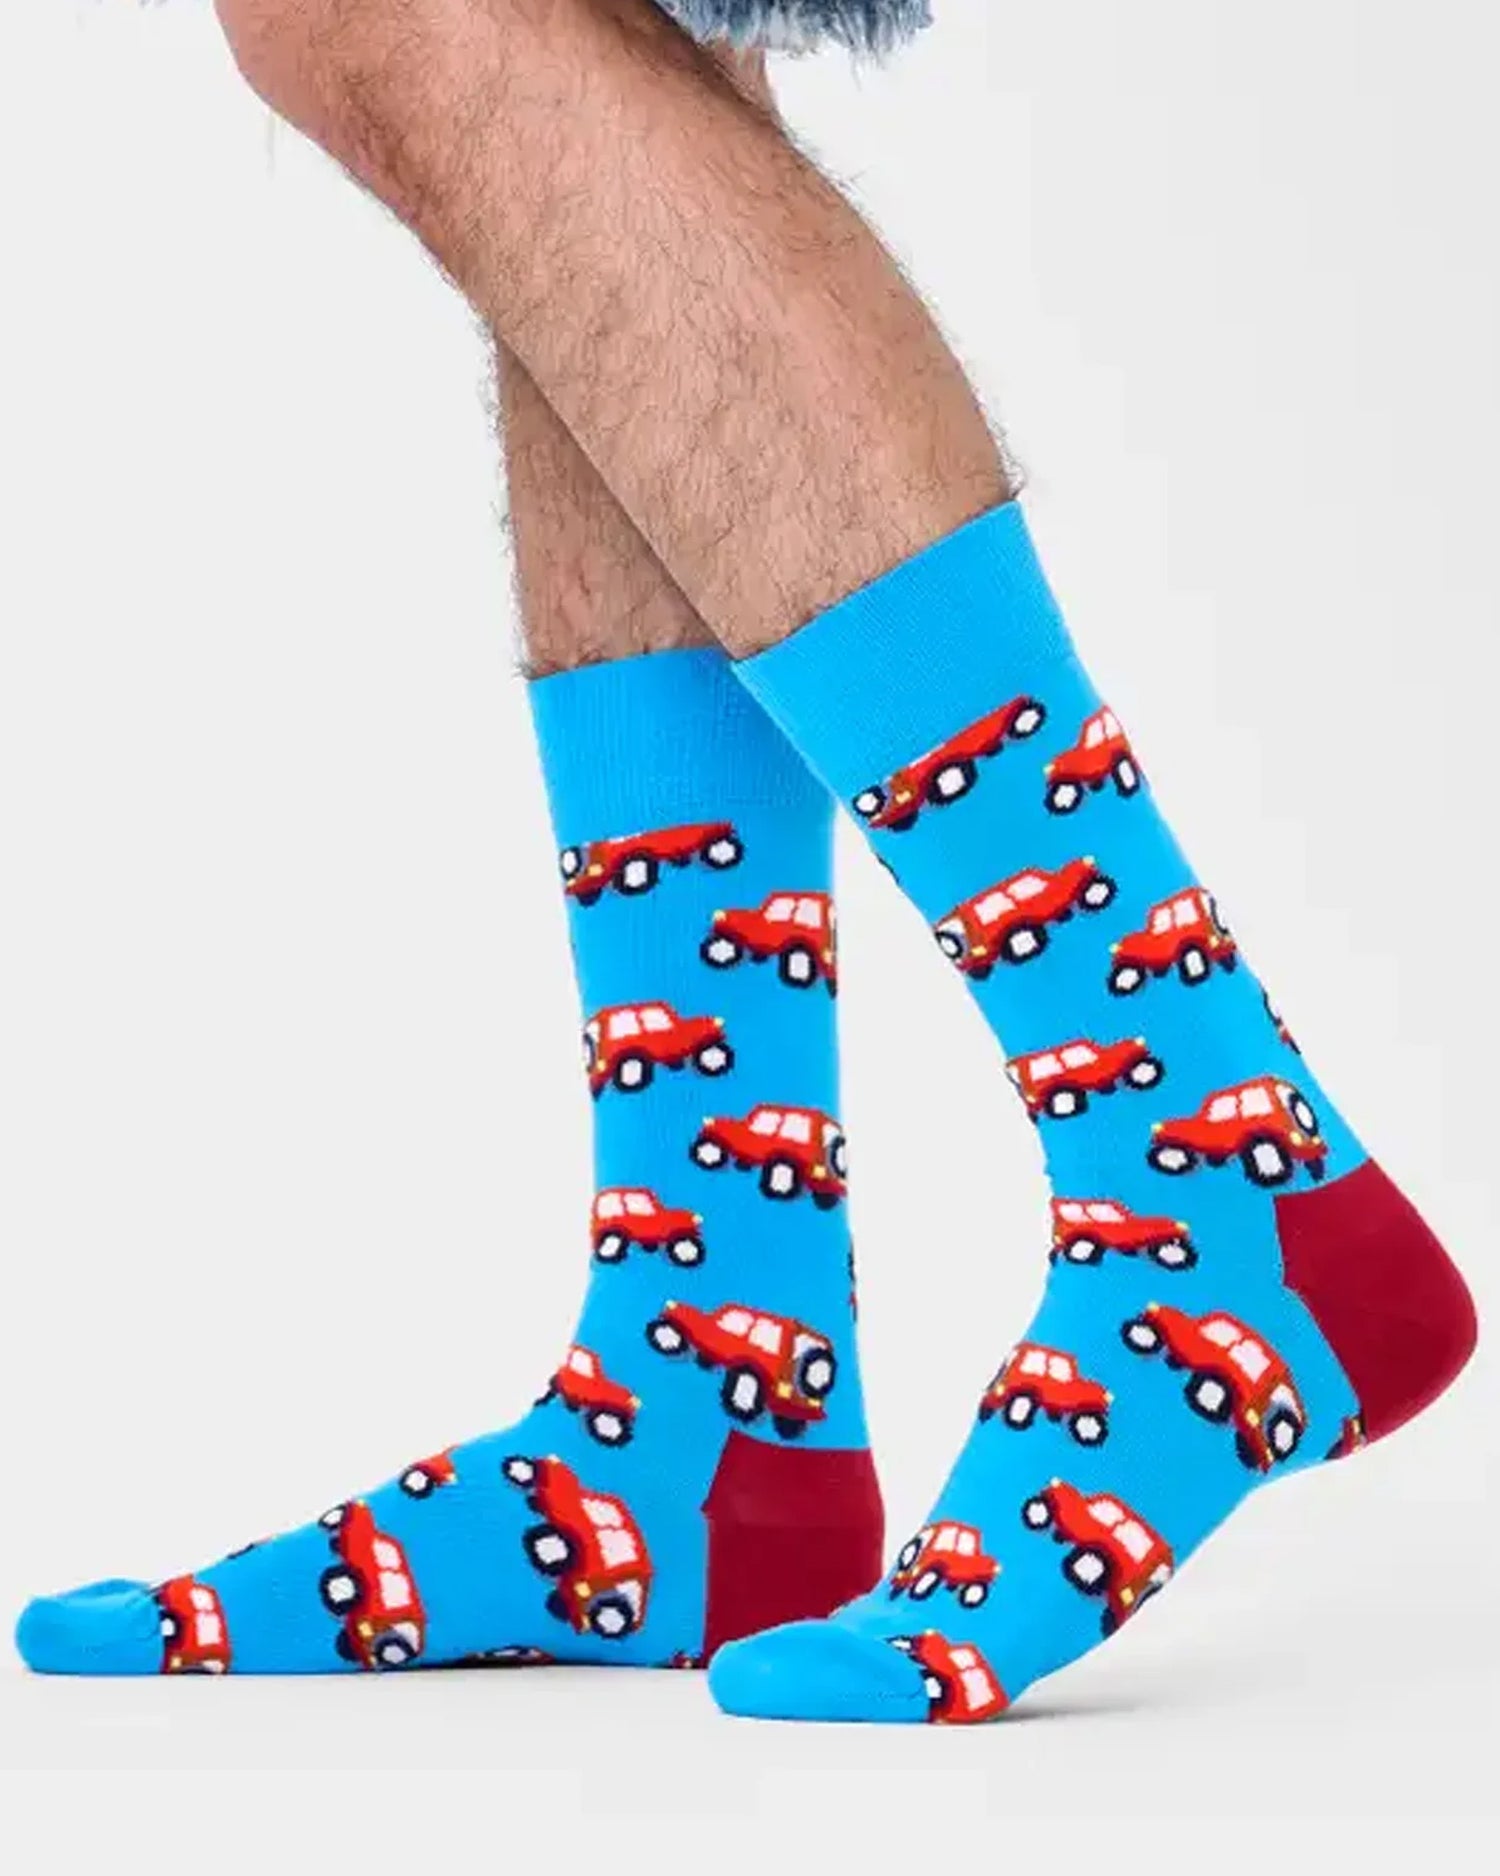 Man wearing sky blue socks with a red car pattern